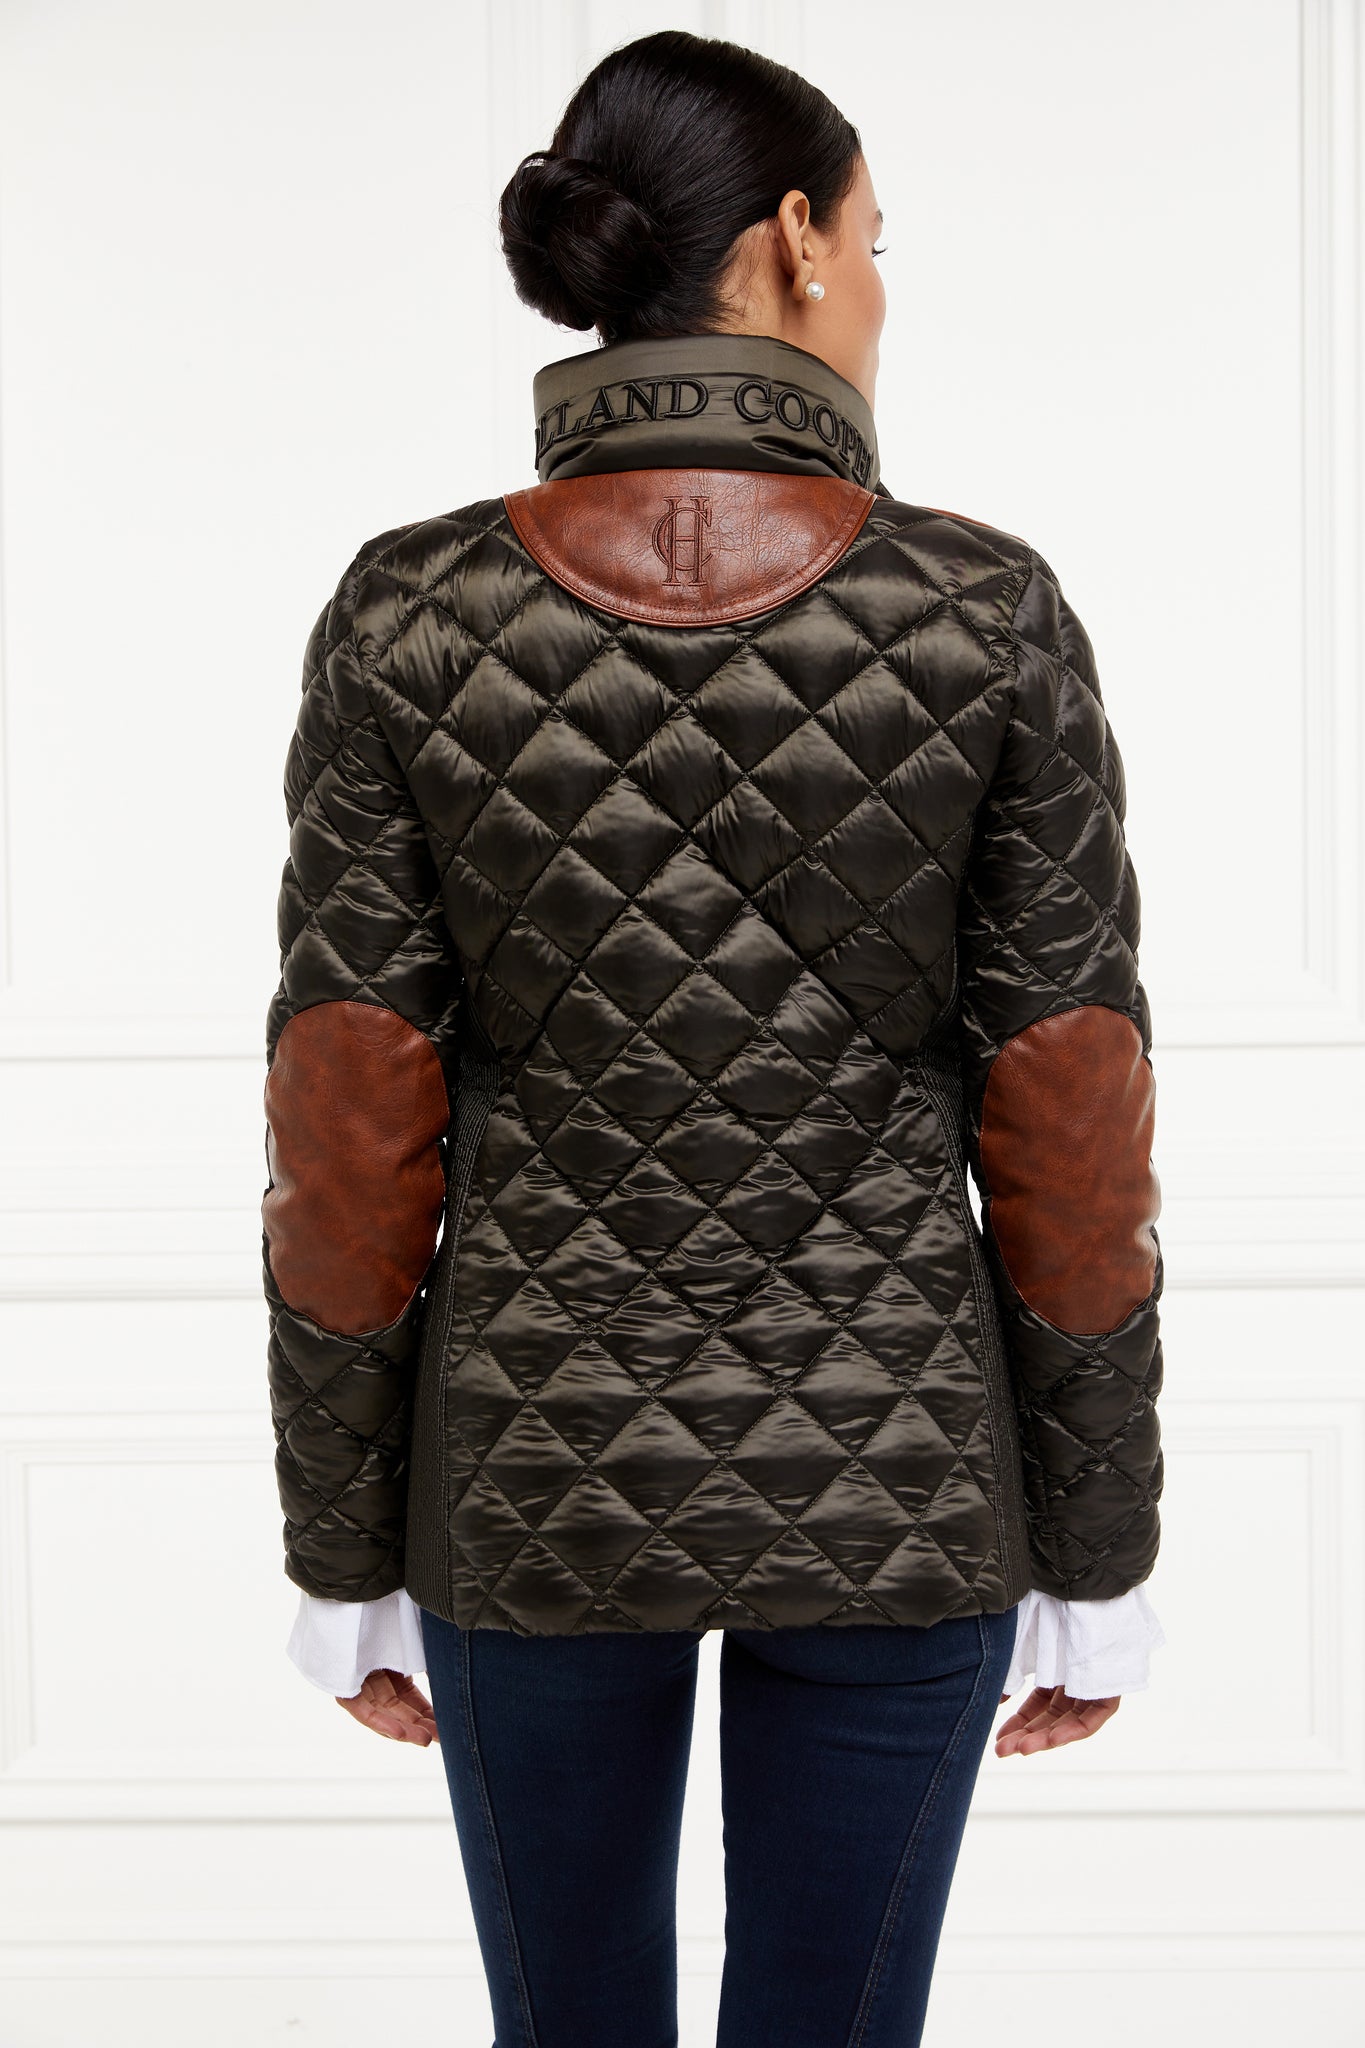 back of womens diamond quilted khaki jacket with contrast tan leather elbow and shoulder pads large front pockets and shirred side panels